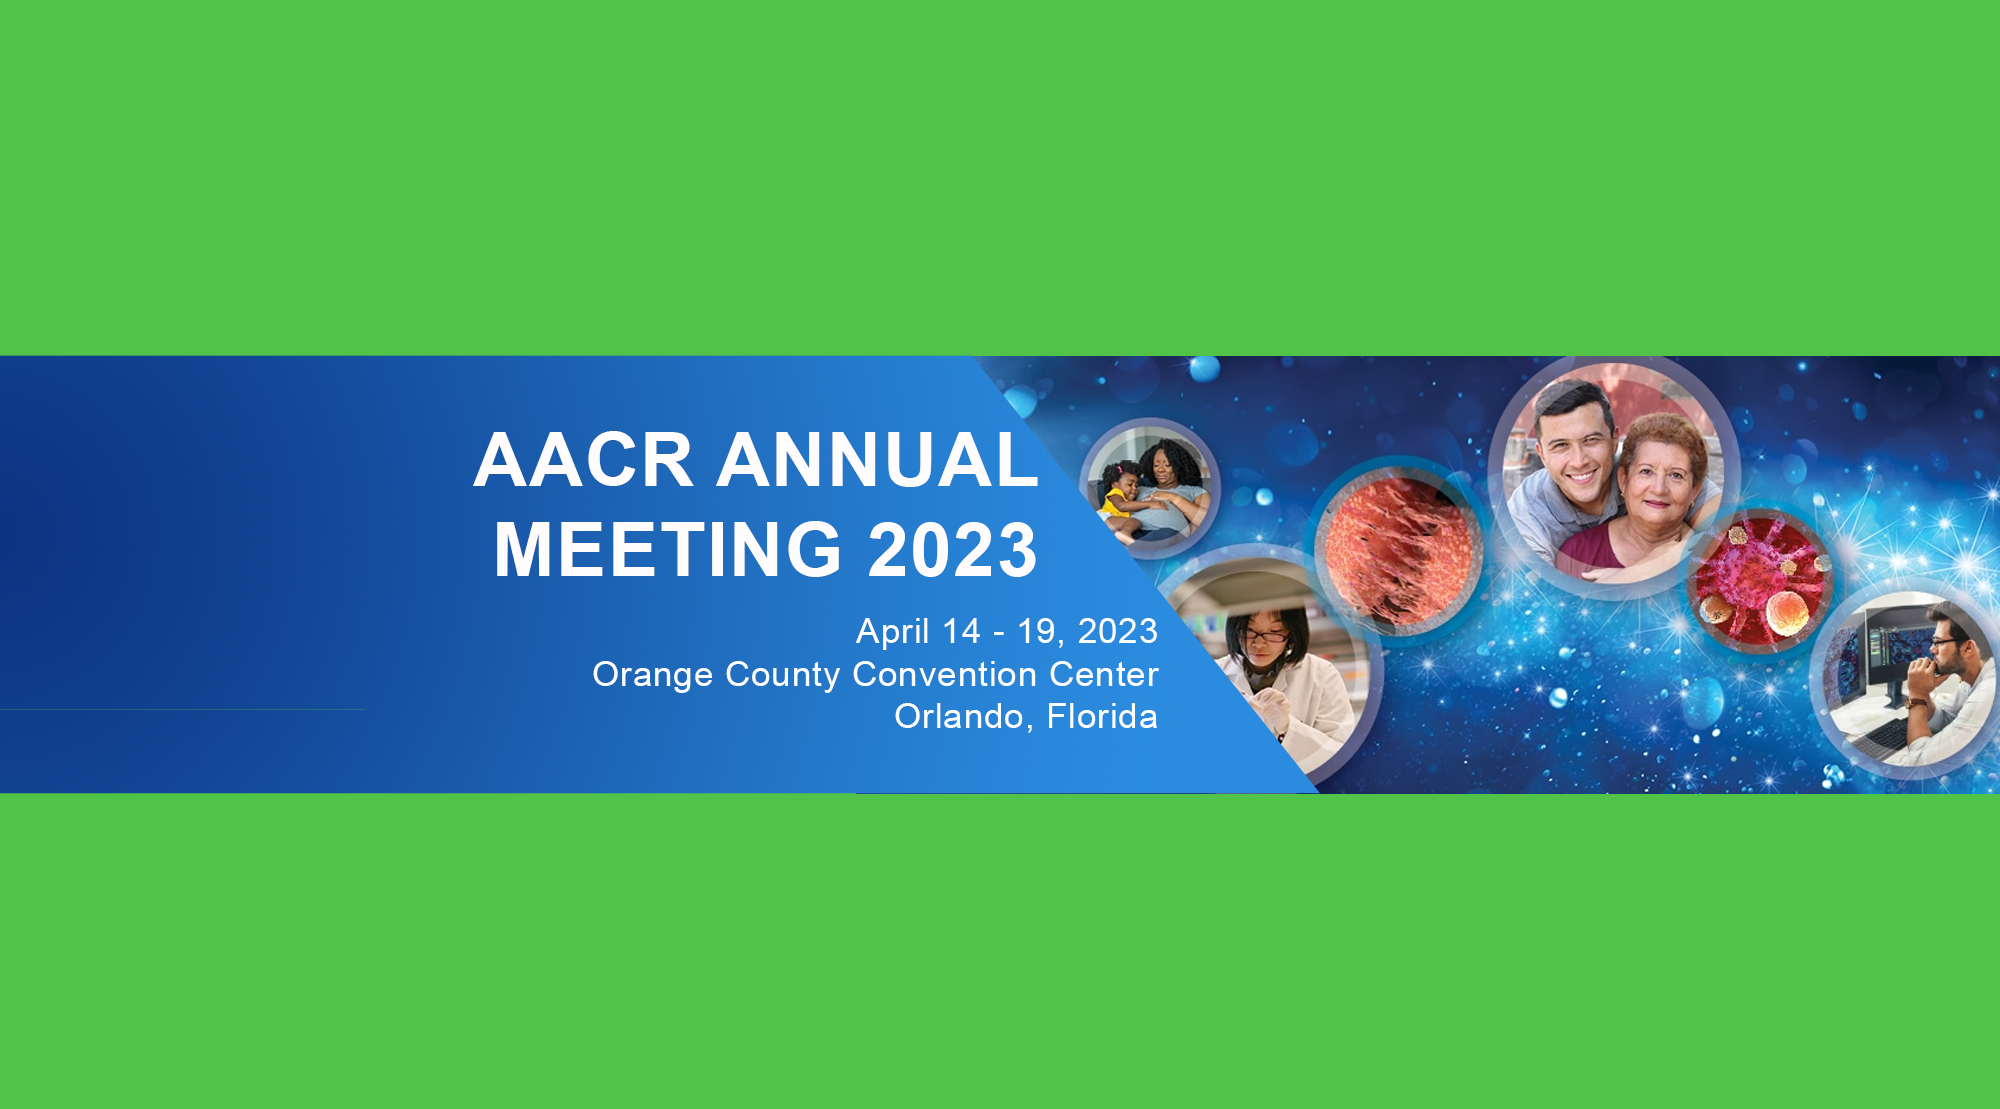 AACR ANNUAL MEETING 2023